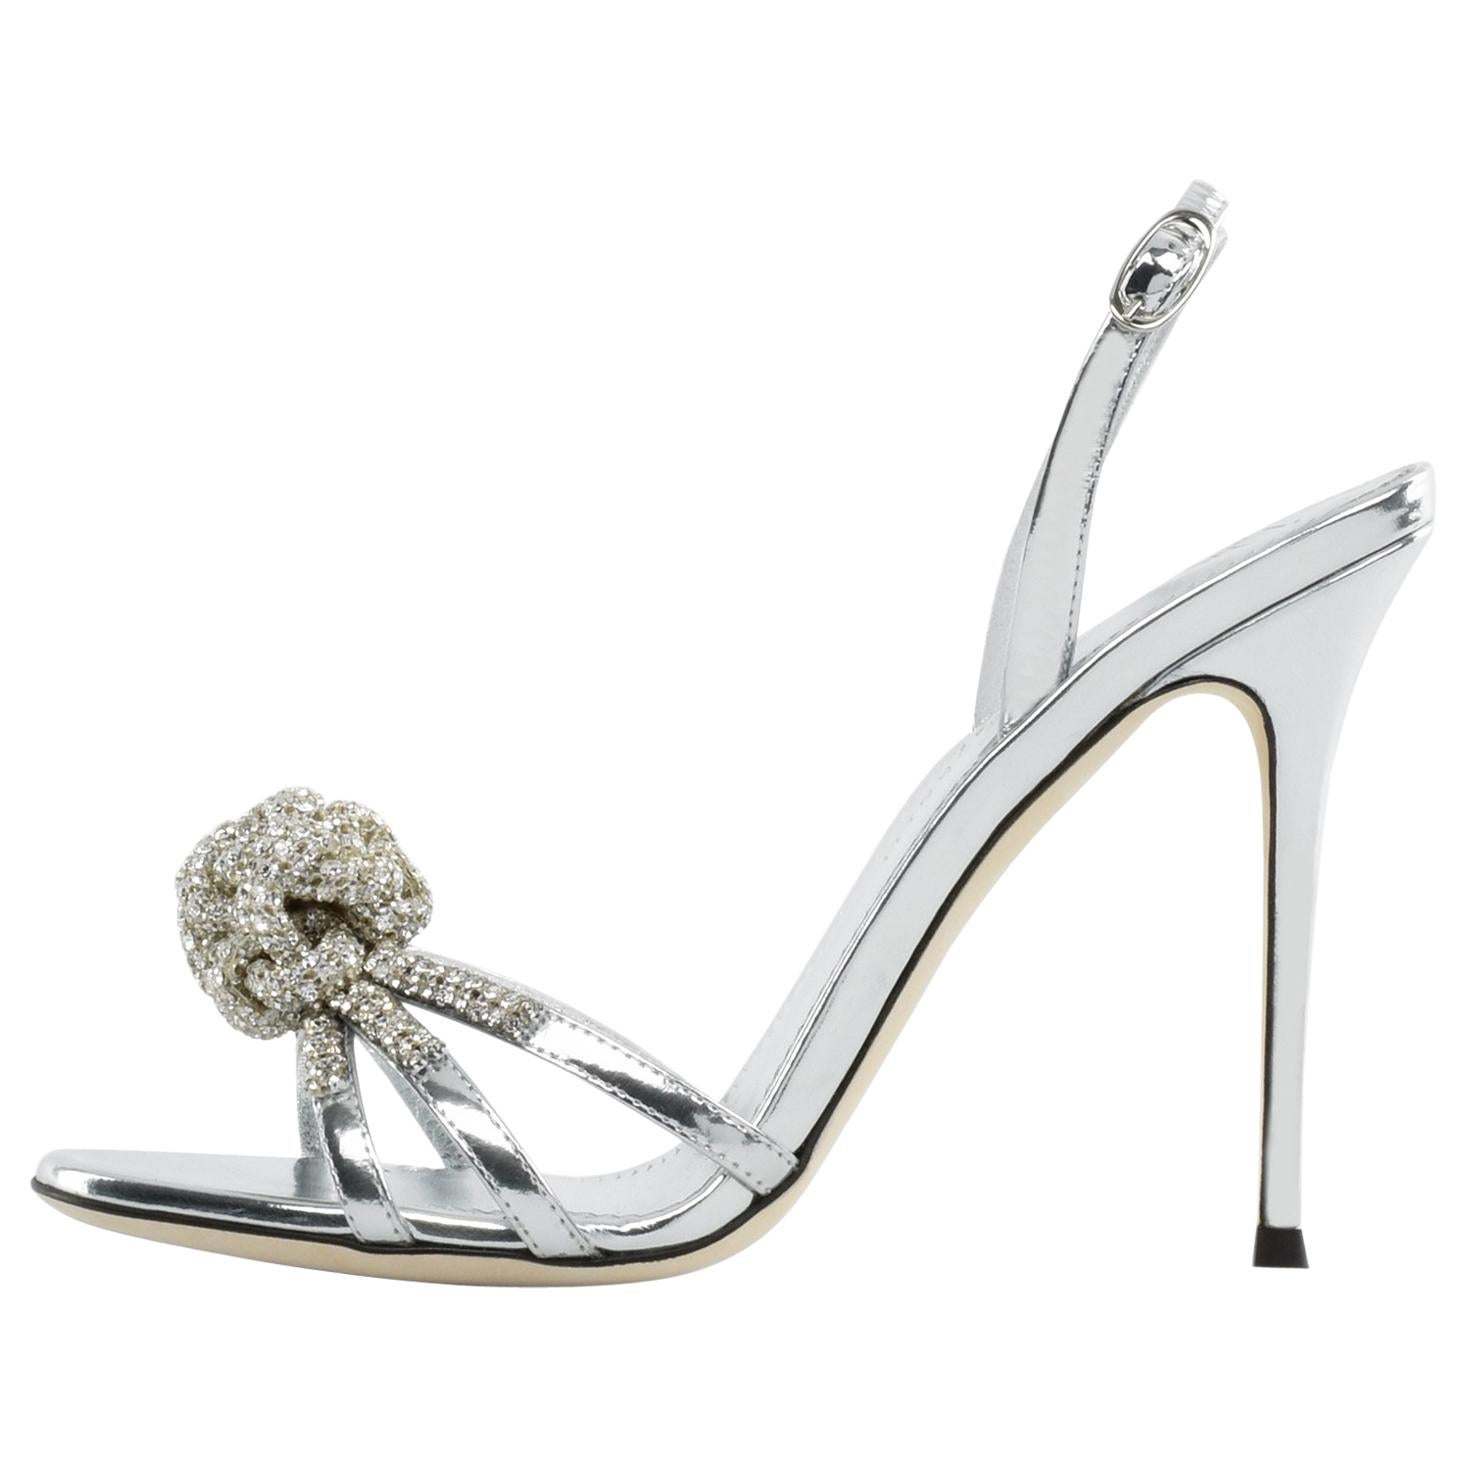 Giuseppe Zanotti NEW Silver Patent Leather Crystal Sandals Heels in Box